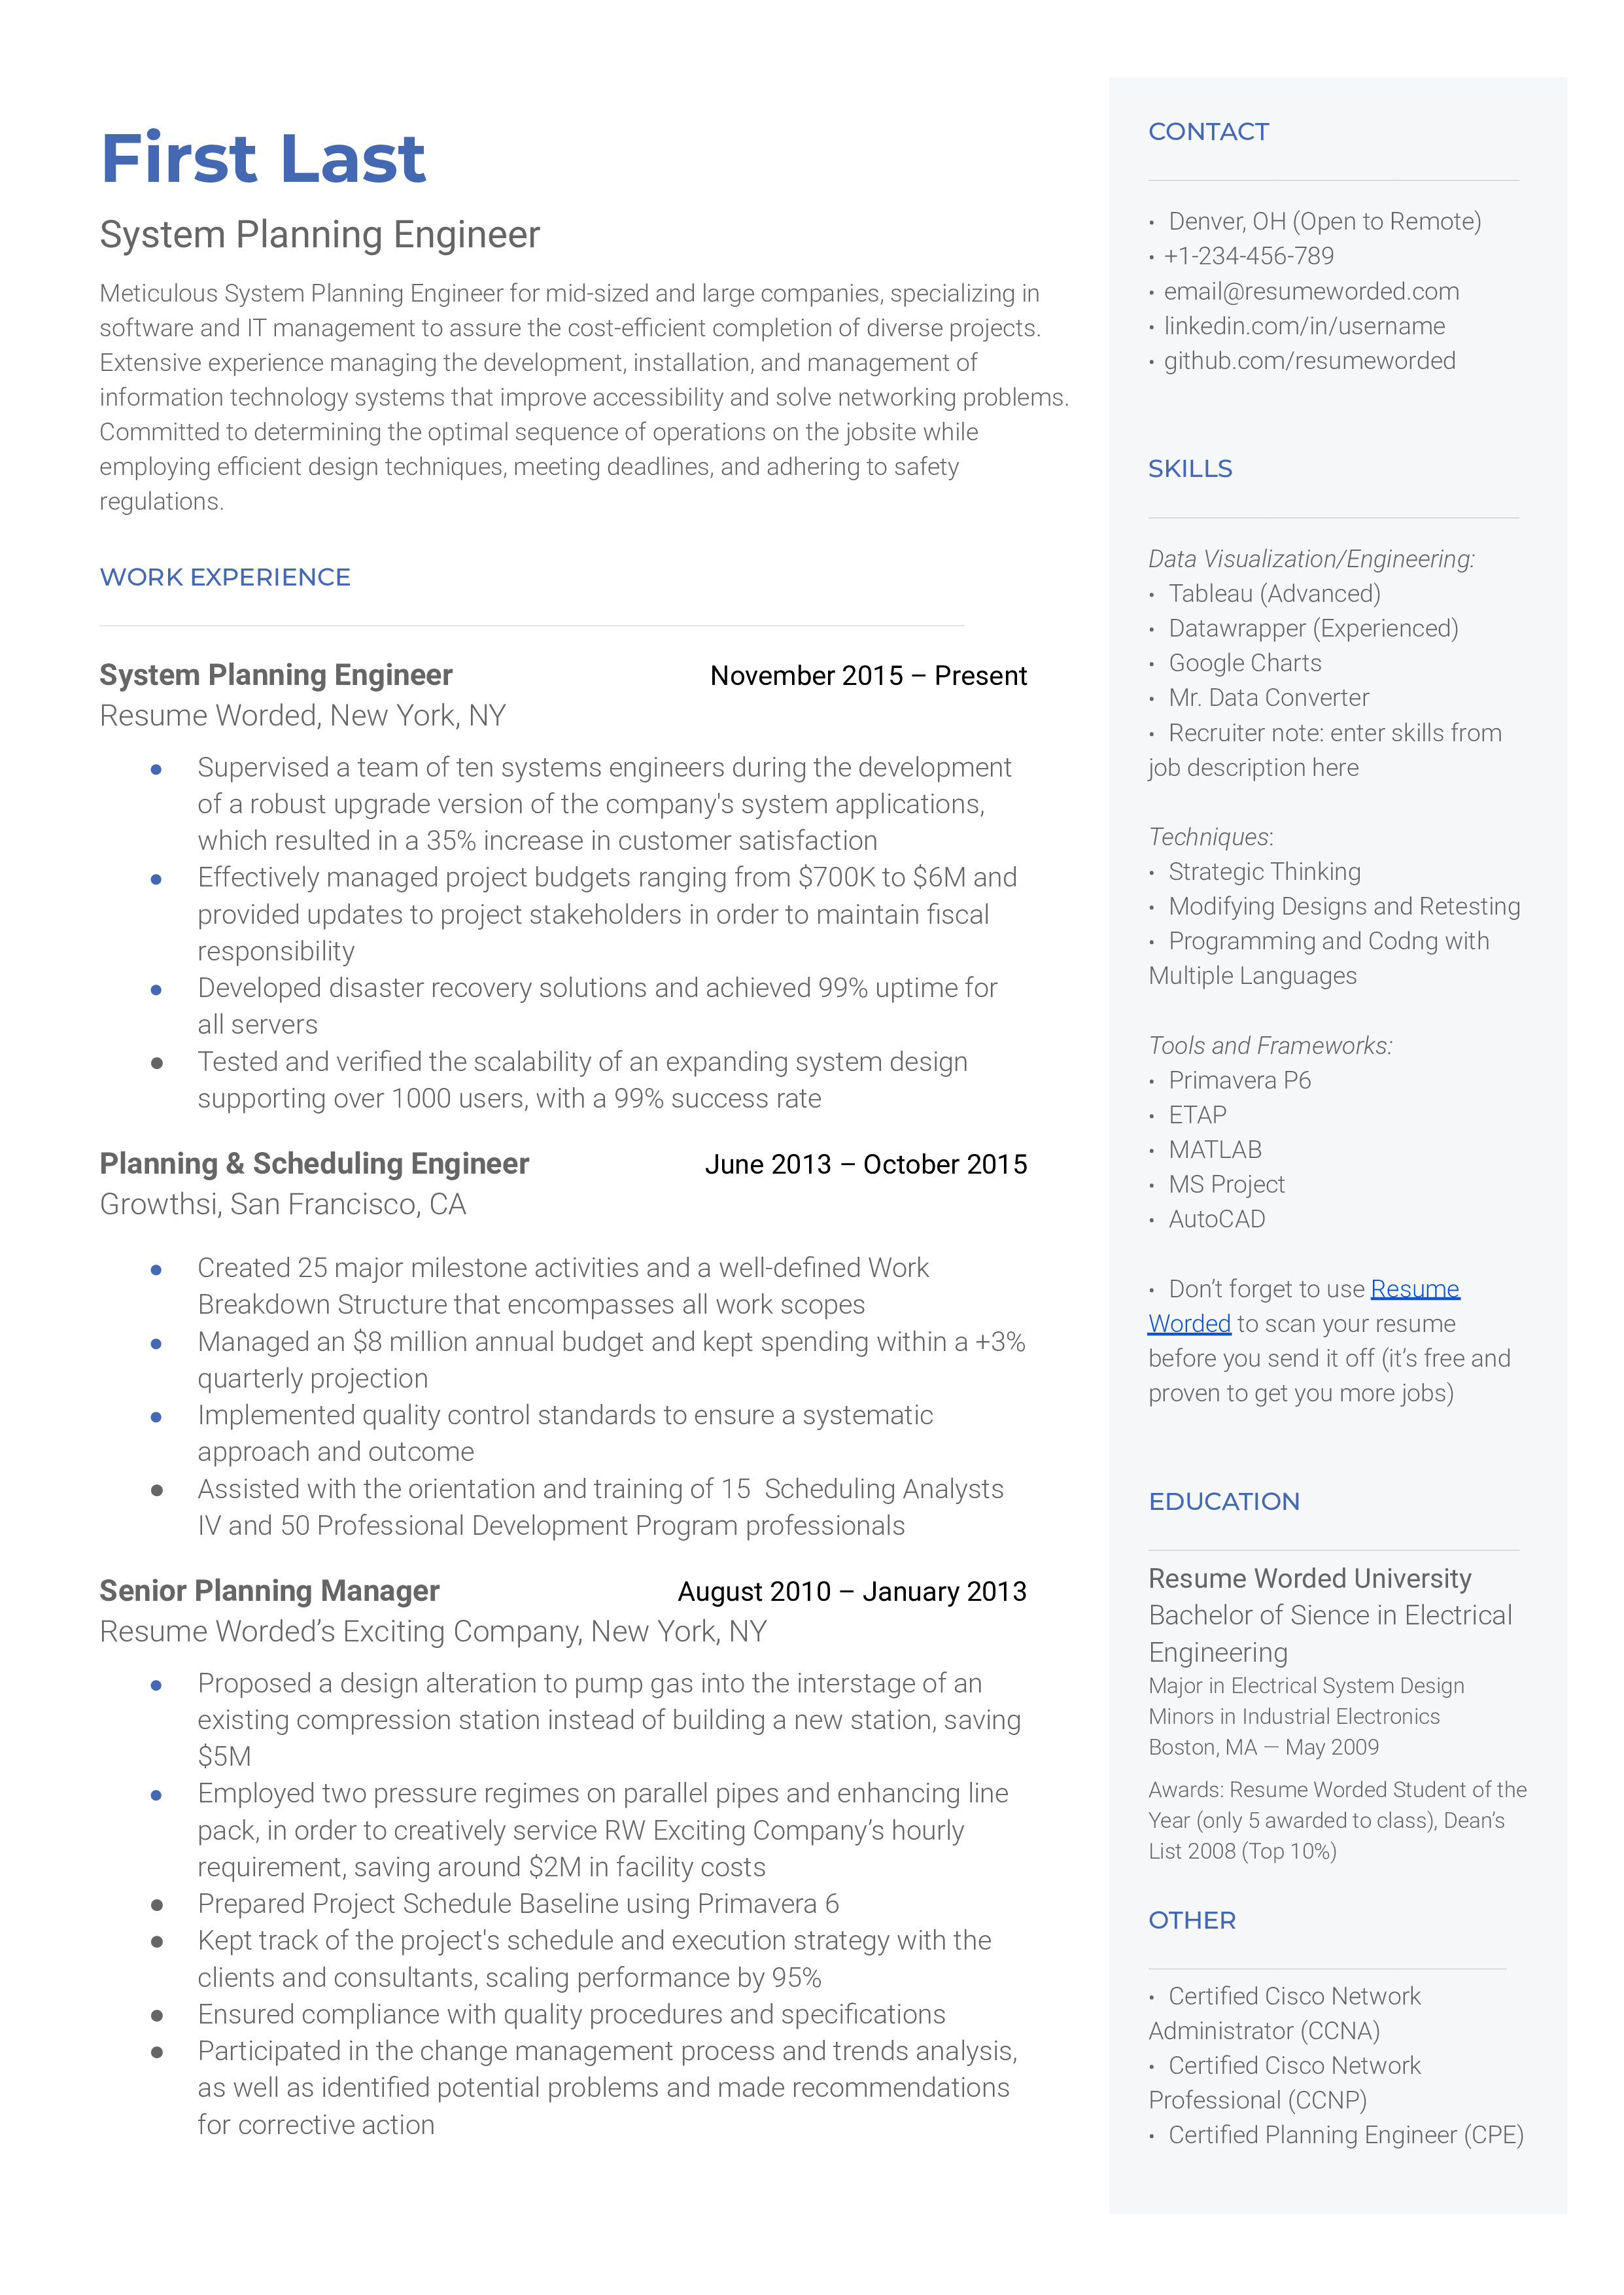 A professional CV of a System Planning Engineer showcasing tech skills and project experience.